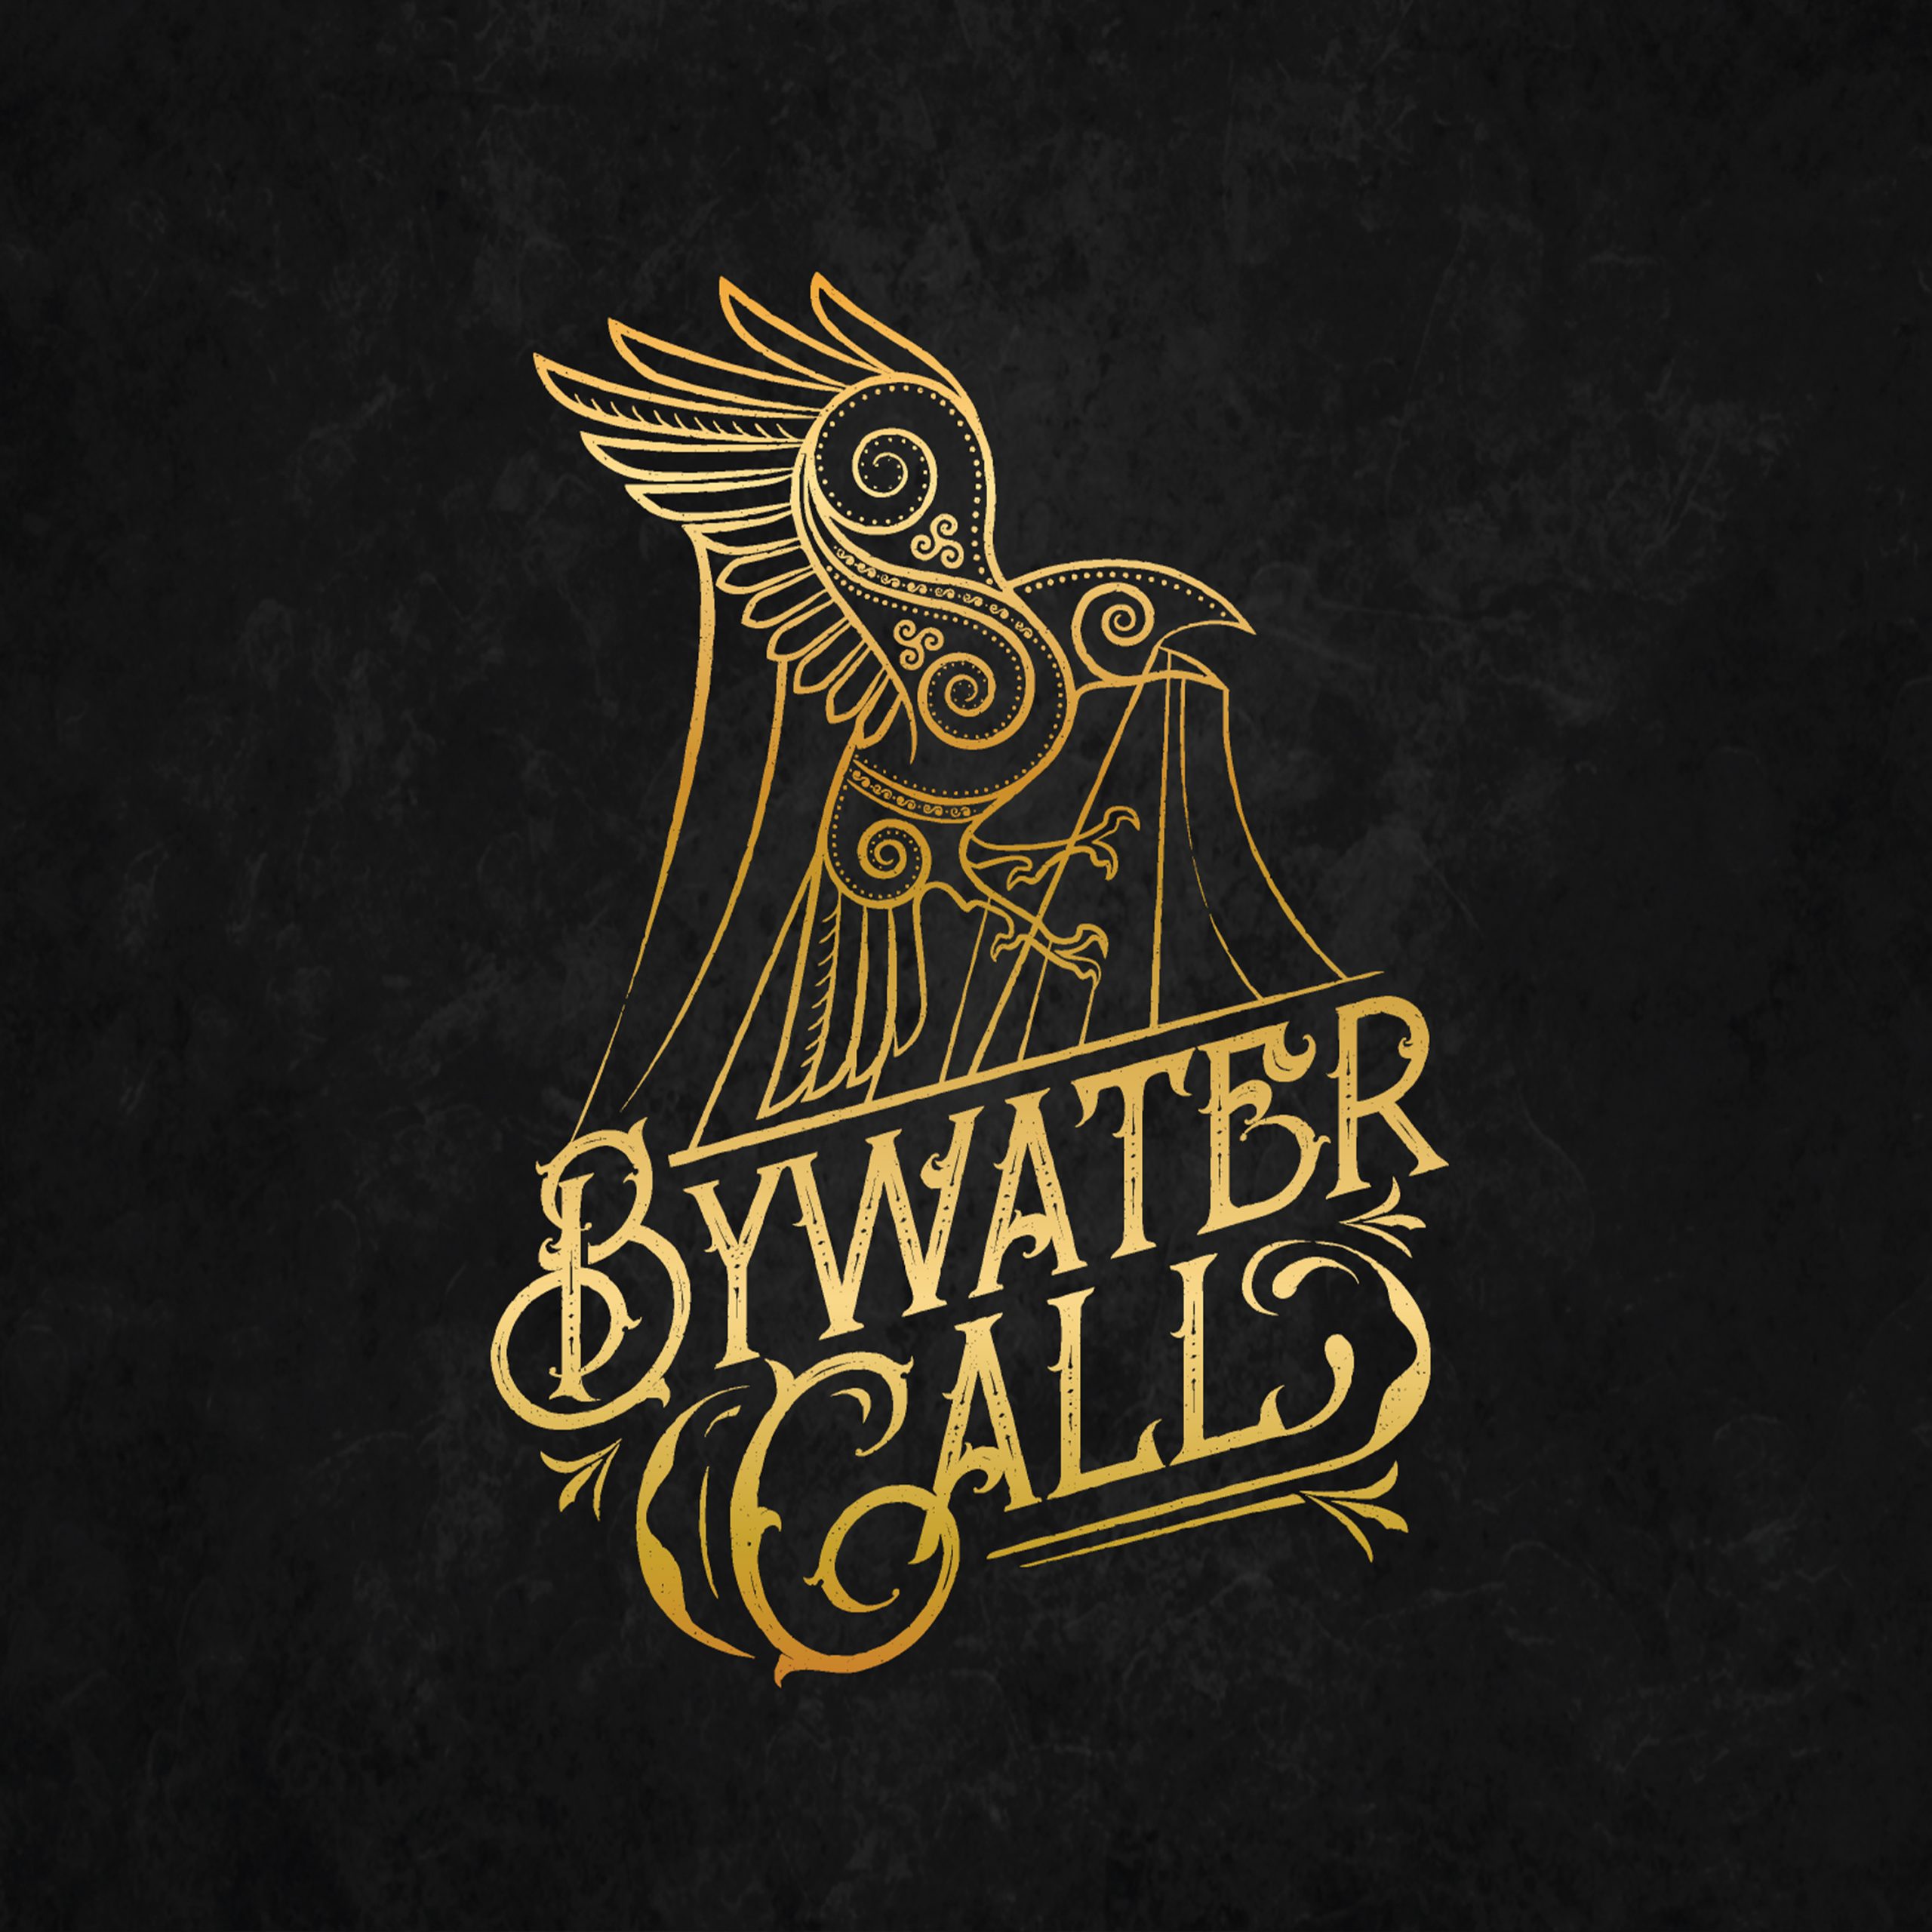 Bywater Call, Set September 2nd Release Date for New Album, Remain